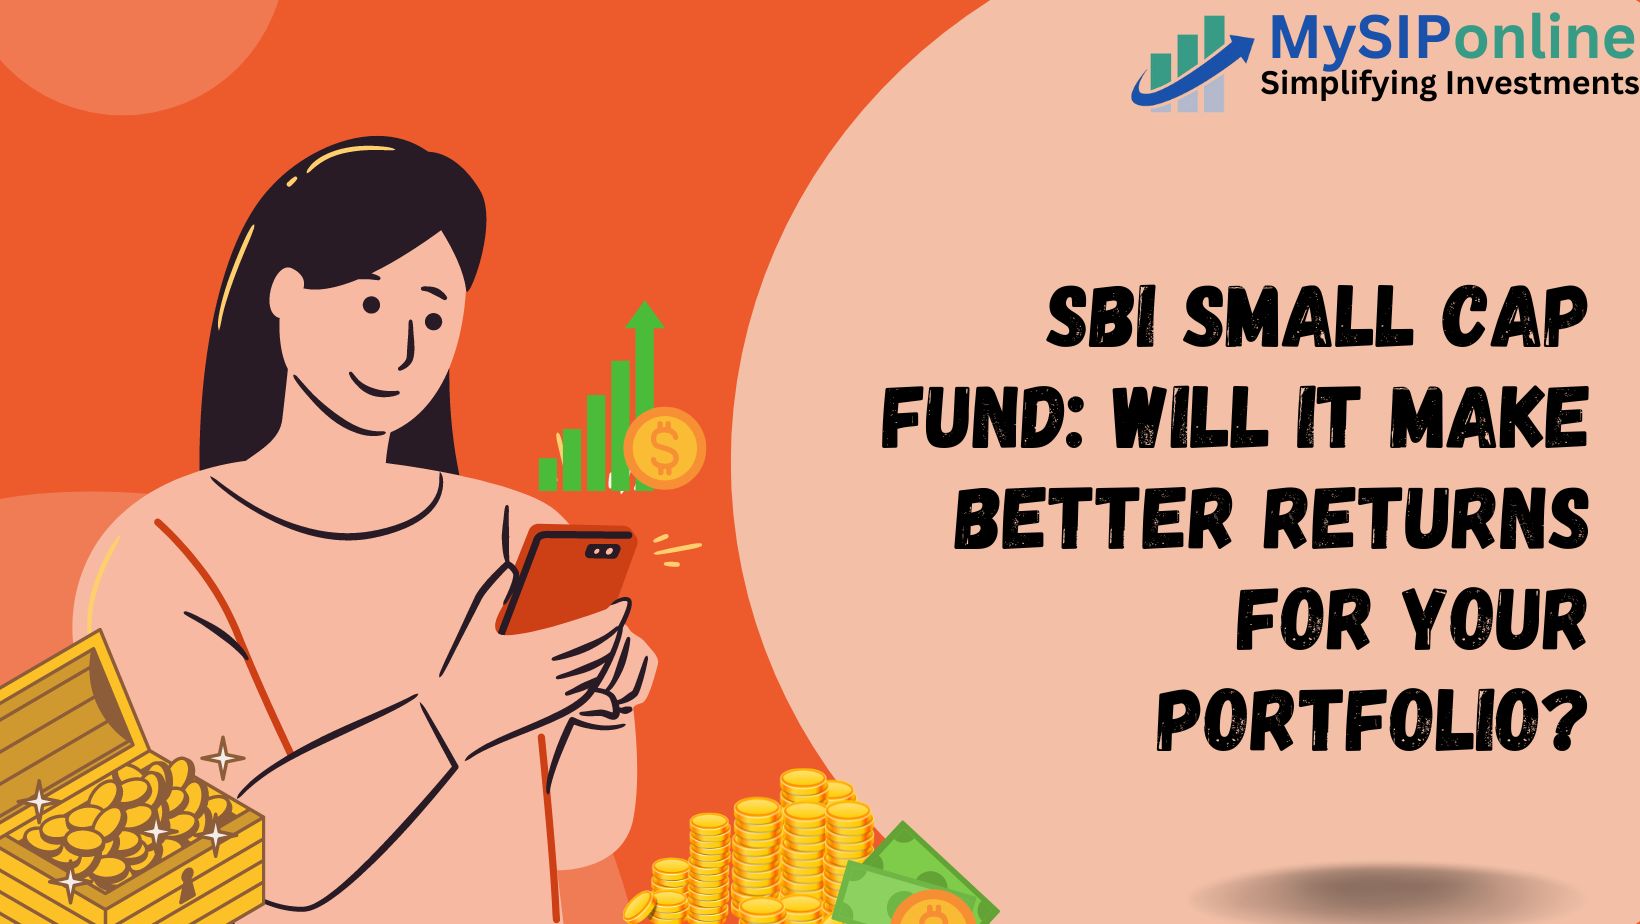 SBI Small Cap Fund: Will It Make Better Returns for Your Portfolio?